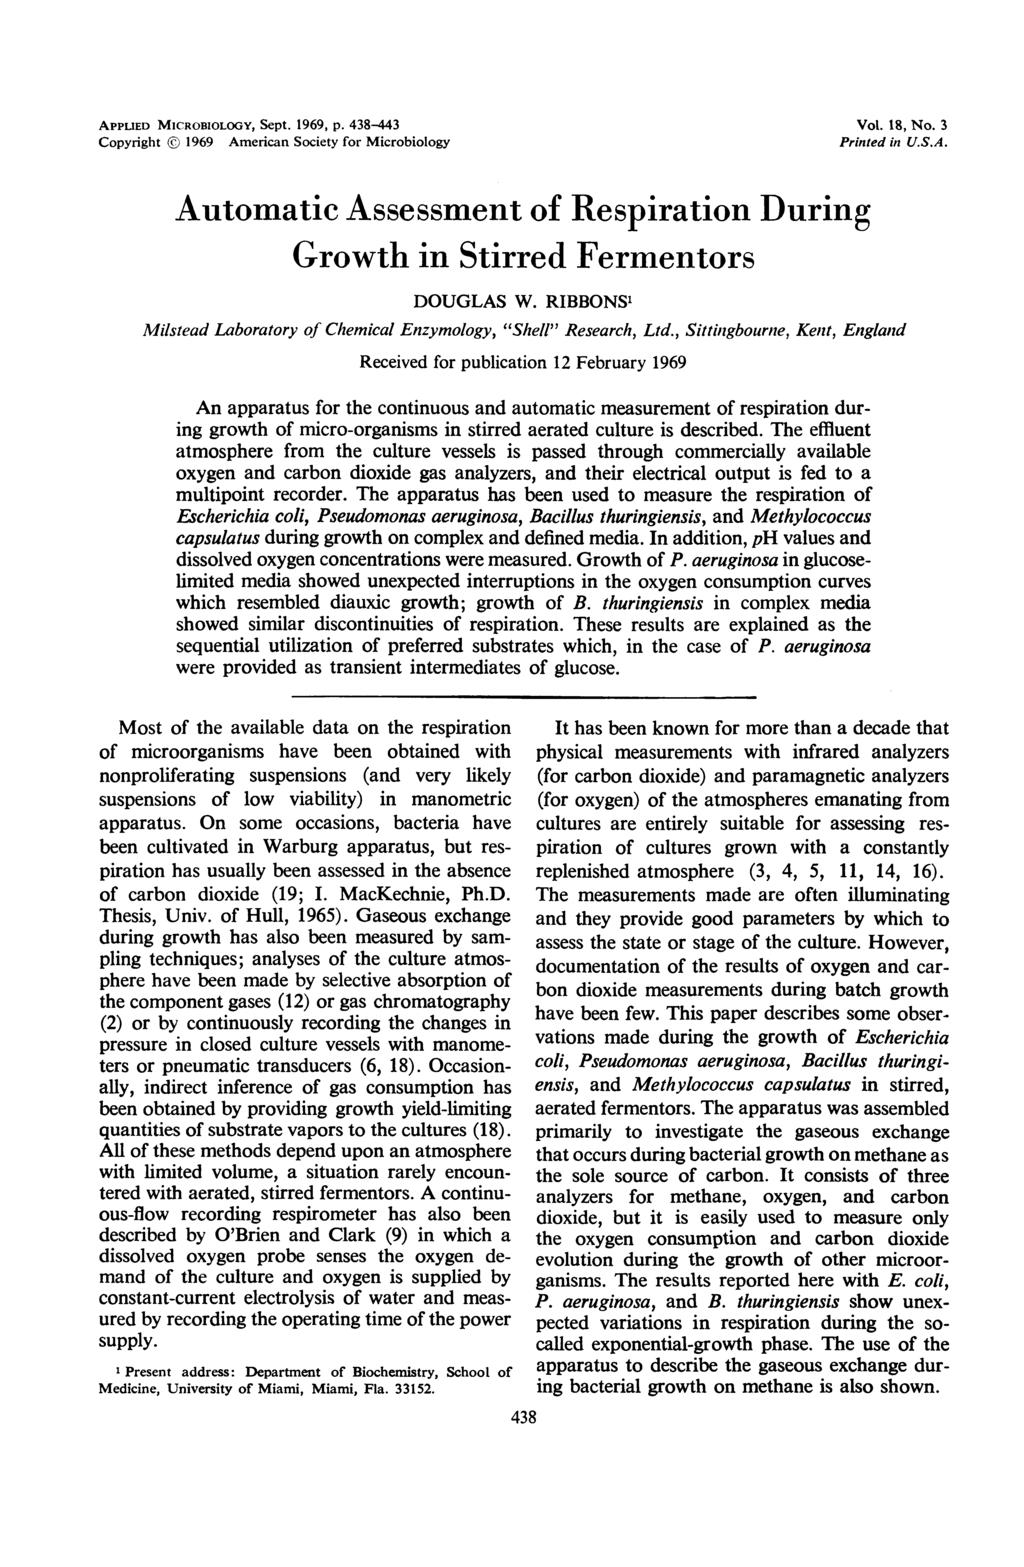 APPLIED MICROBIOLOGY, Sept. 1969, p. 438-443 Copyright 1969 American Society for Microbiology Vol. 18, No. 3 Printed in U.S.A. Automatic Assessment of Respiration During Growth in Stirred Fermentors DOUGLAS W.